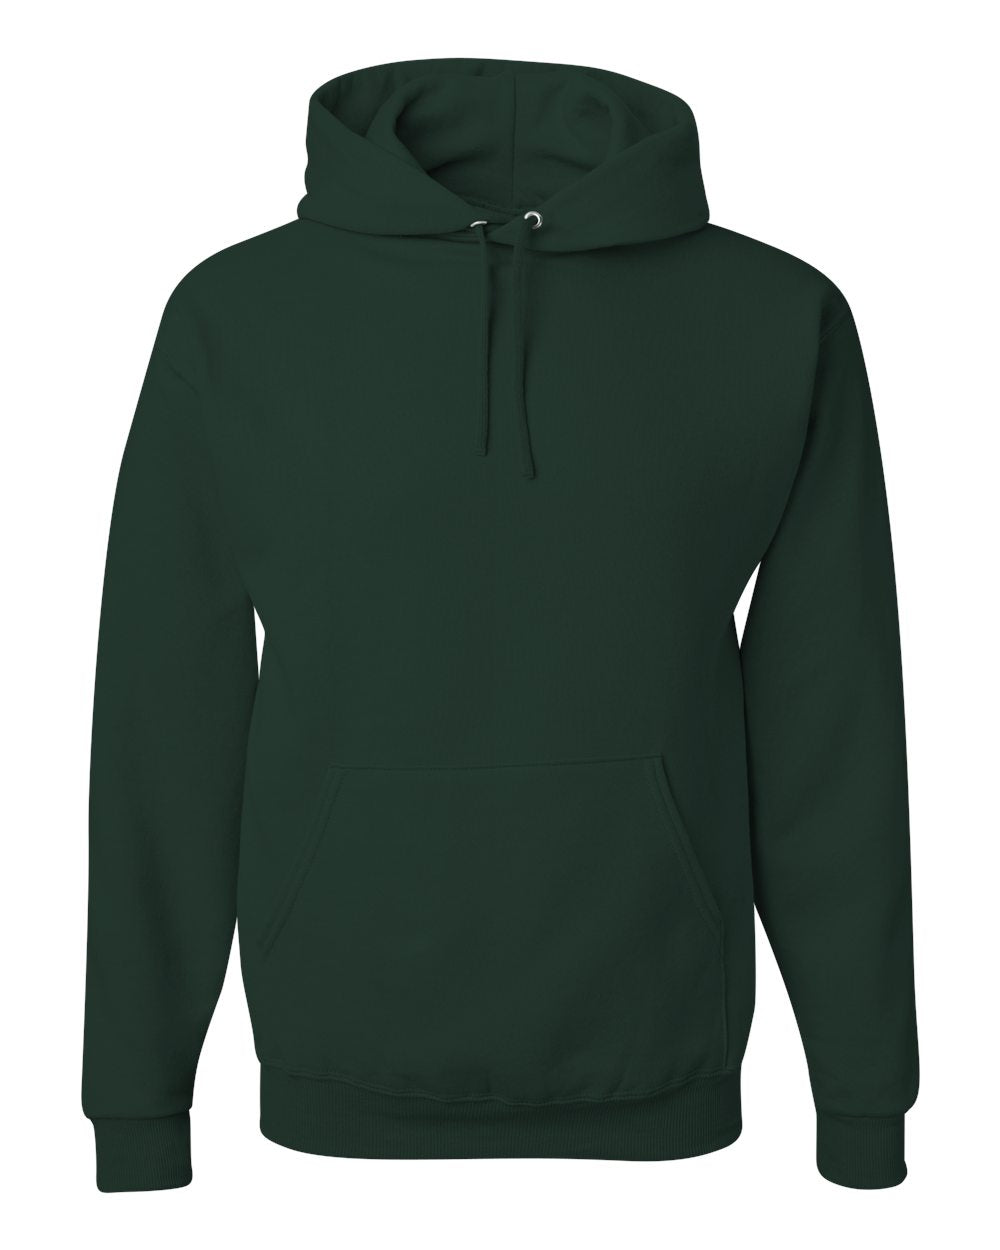 Jerzees Hoodie (996MR) in Forest Green